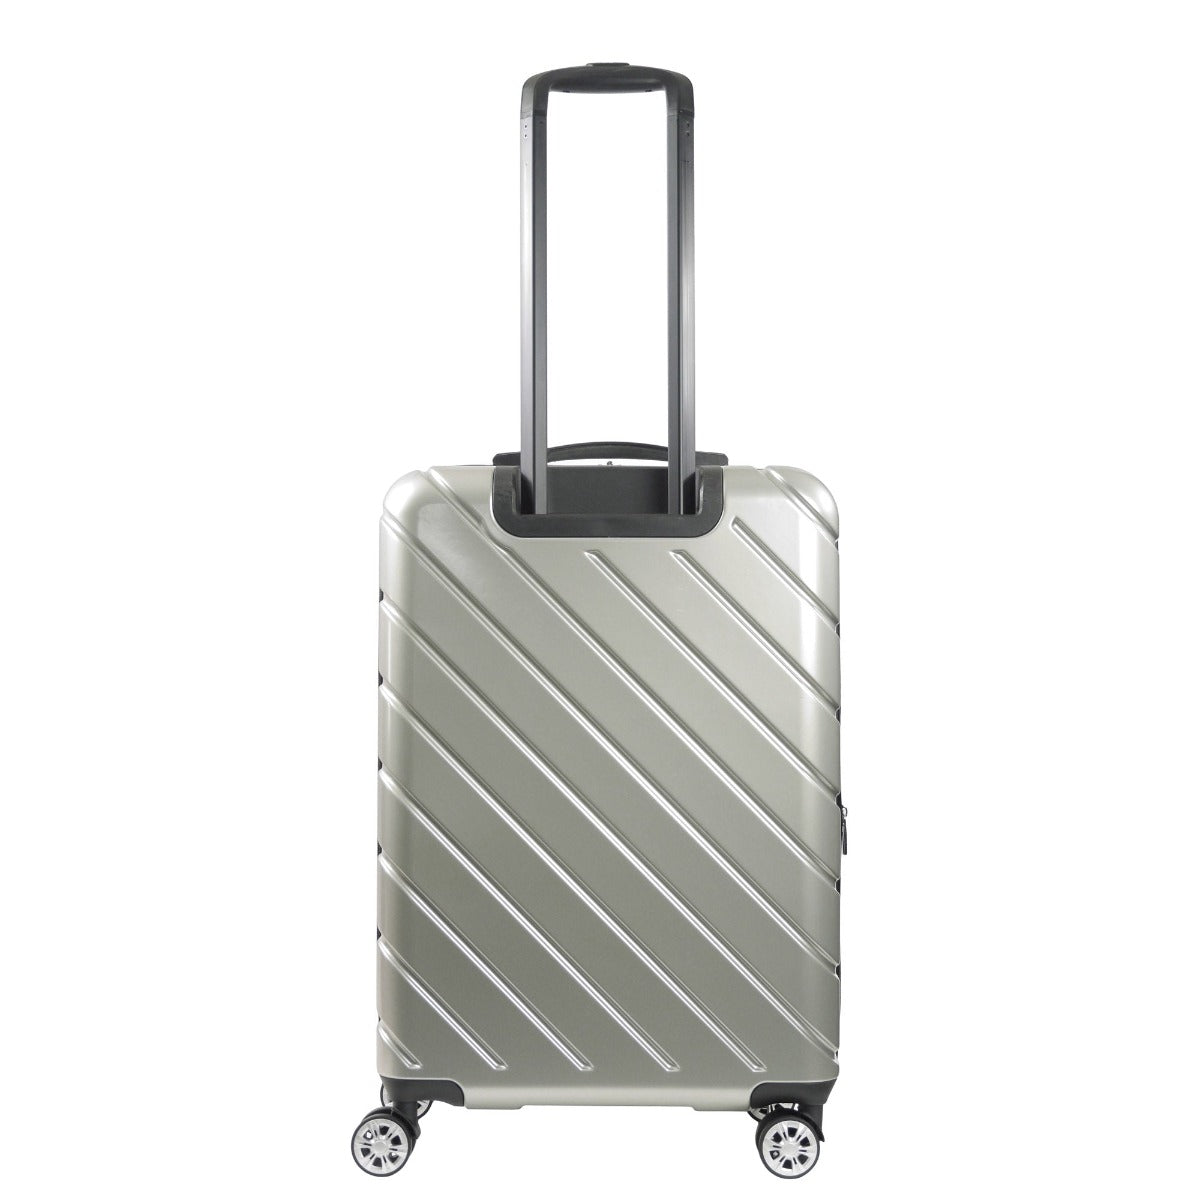 Ful Velocity 27" Expandable Hardside Spinner Luggage, Silver